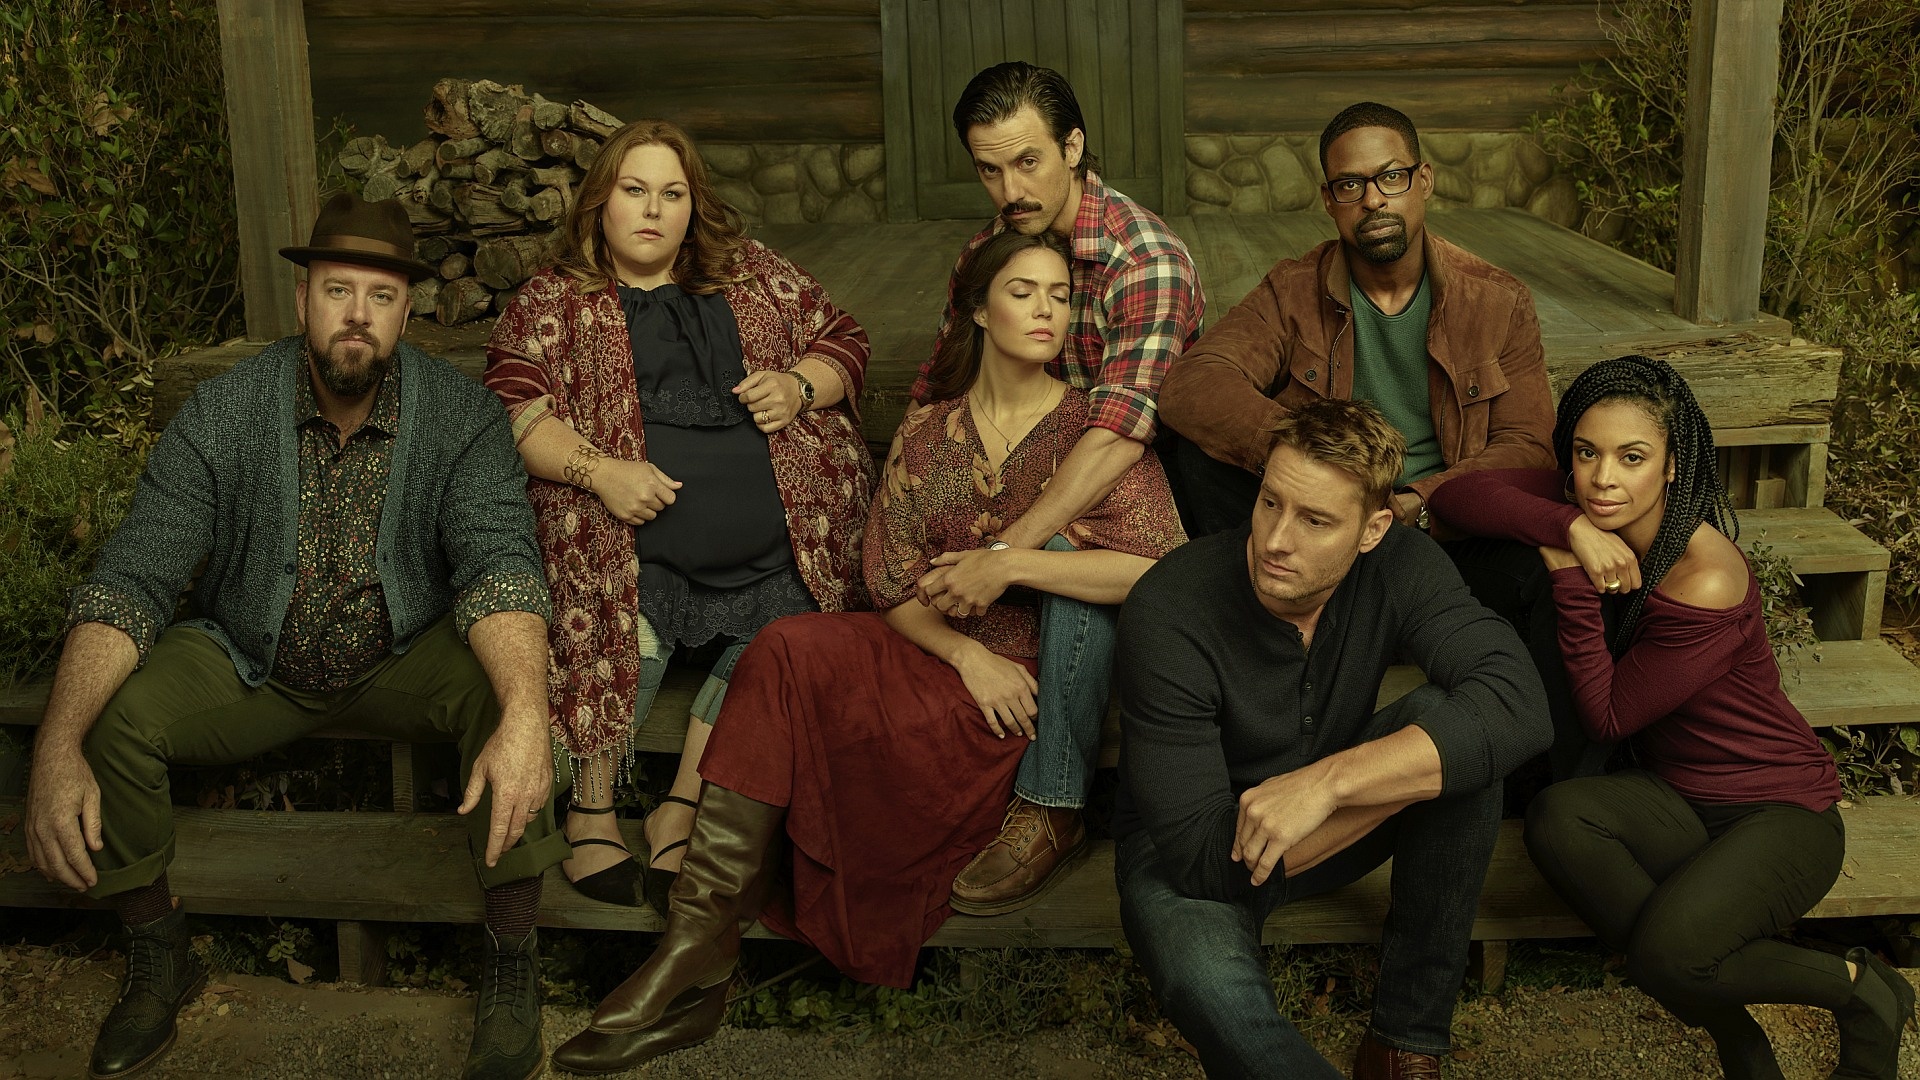 This Is Us series, Heartwarming stories, Family dynamics, Unexpected twists, 1920x1080 Full HD Desktop